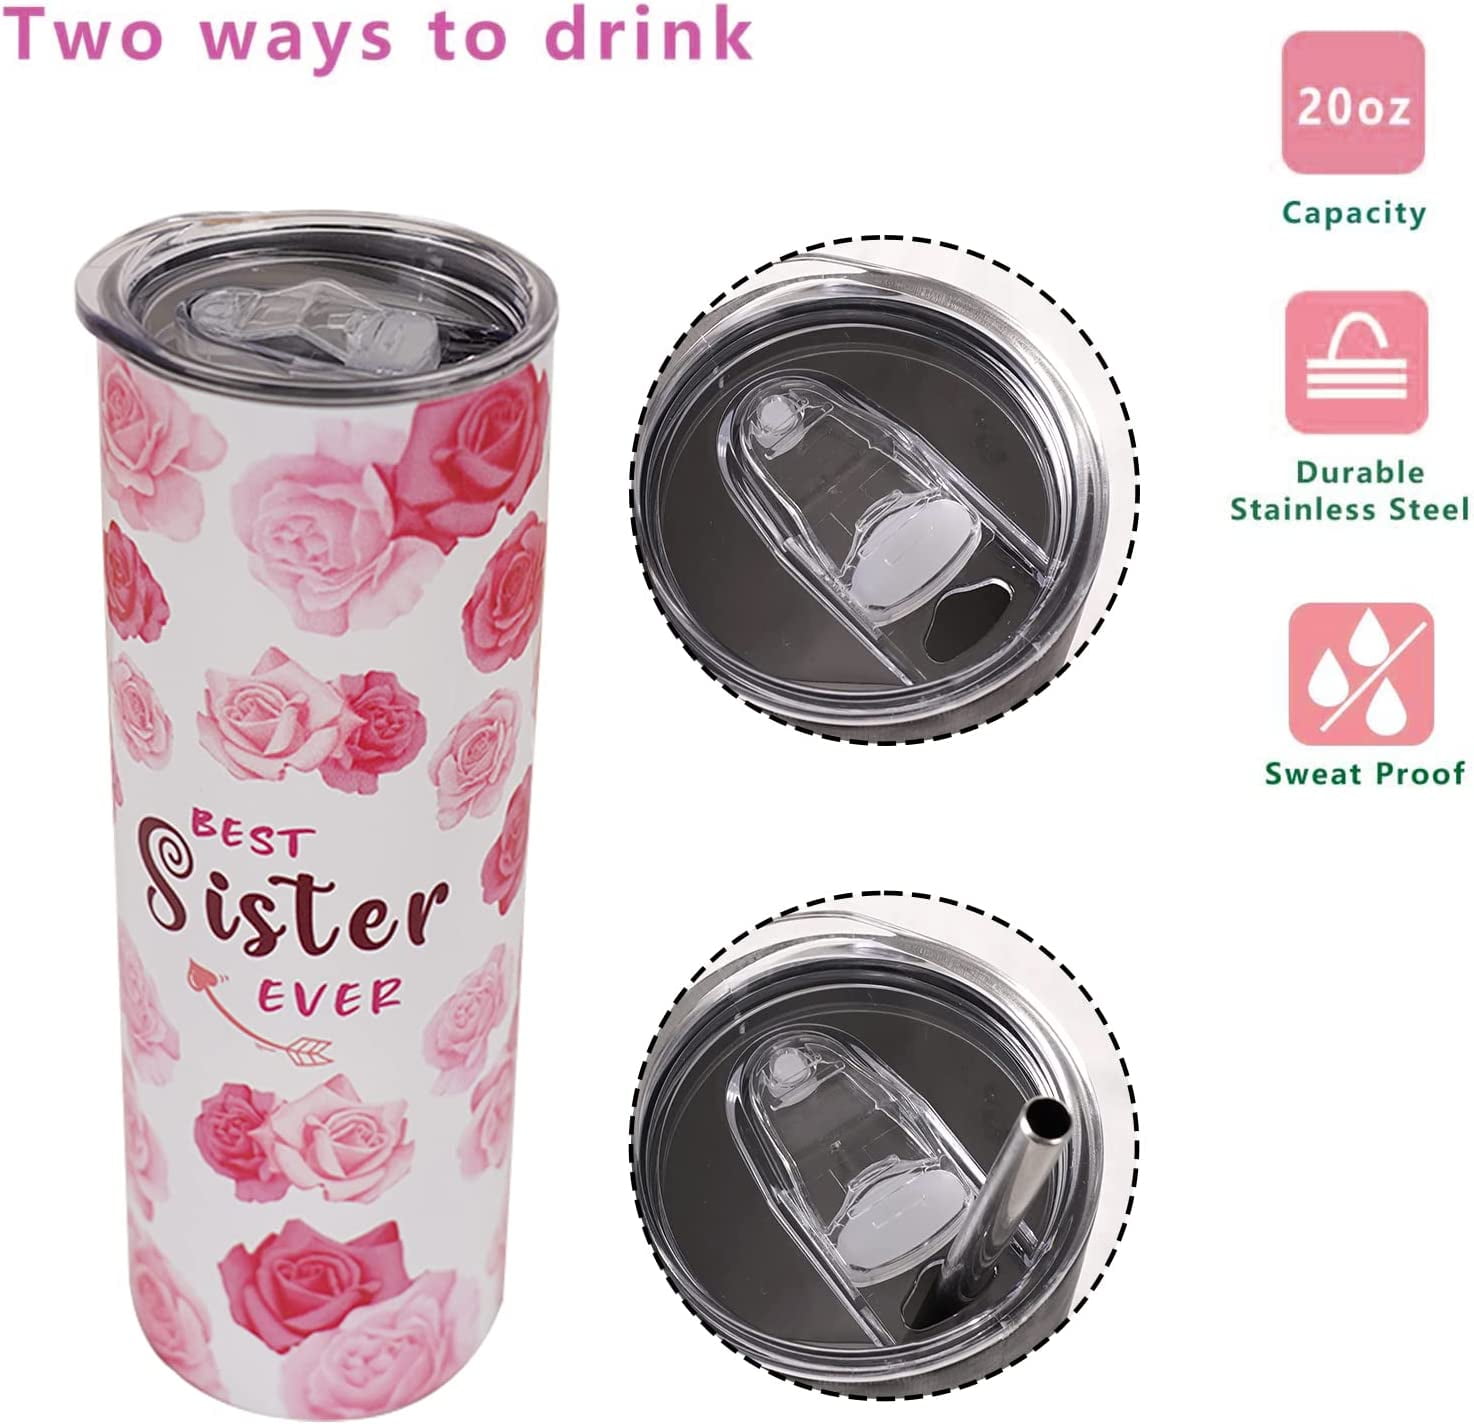 LEADO 16oz Glass Cups with Lids and Straws - Sister Gifts from Sister,  Sister Birthday Gift Ideas - …See more LEADO 16oz Glass Cups with Lids and